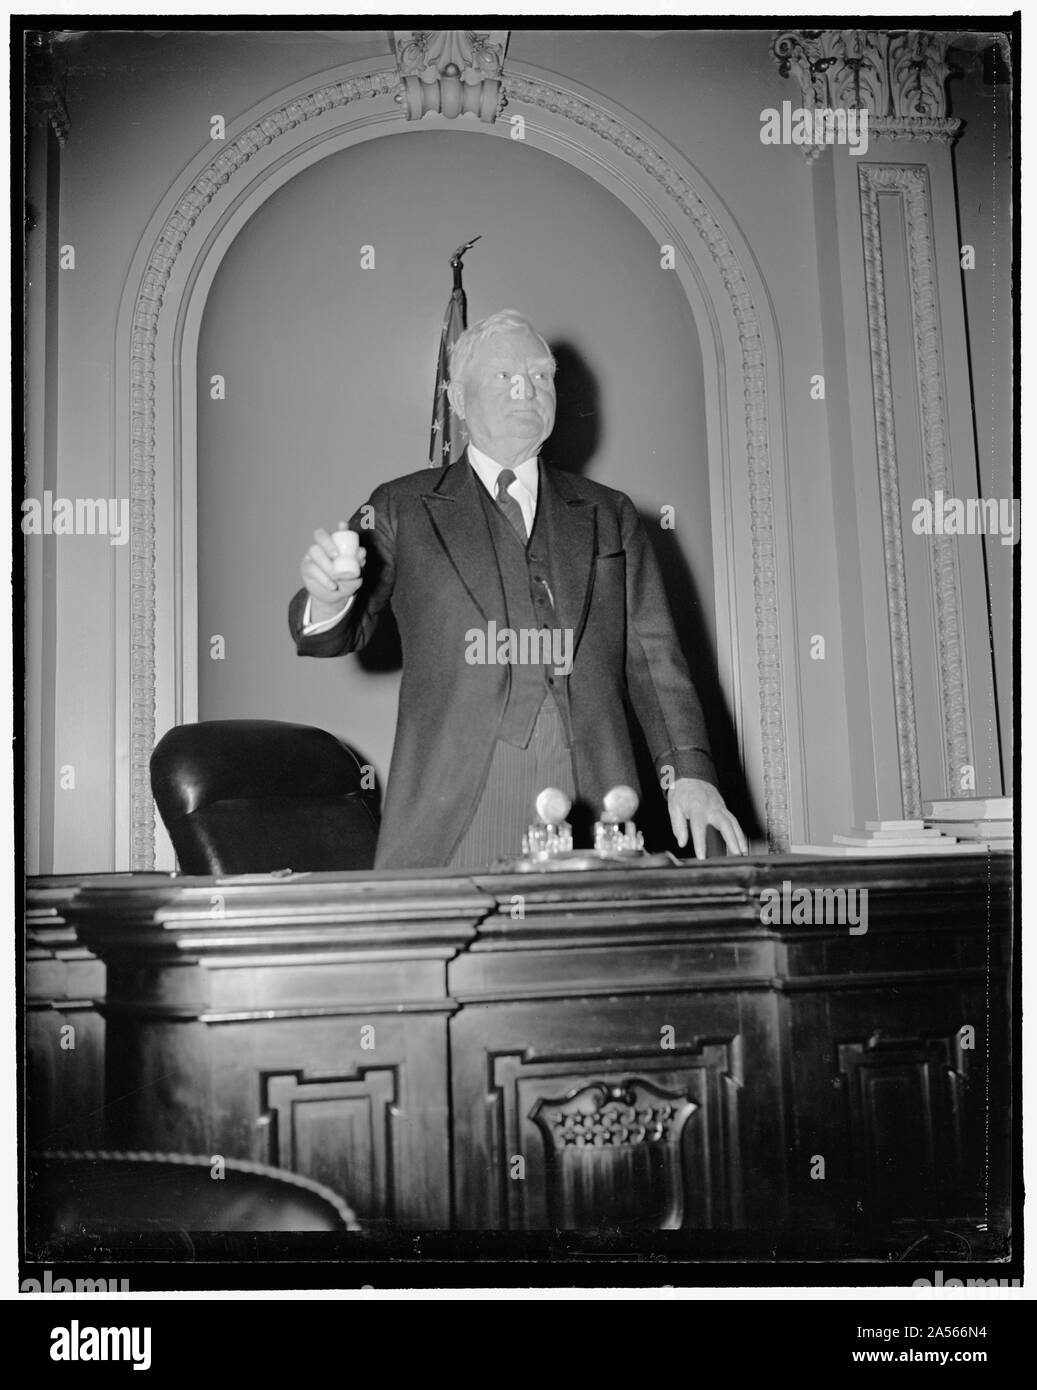 Vice President Garner brings down gavel to convene Senate in new session. Washington, D.C., Jan. 3. Vice President John N. Garner as he called the Senate to order today for the third session of the 76th Congress Stock Photo